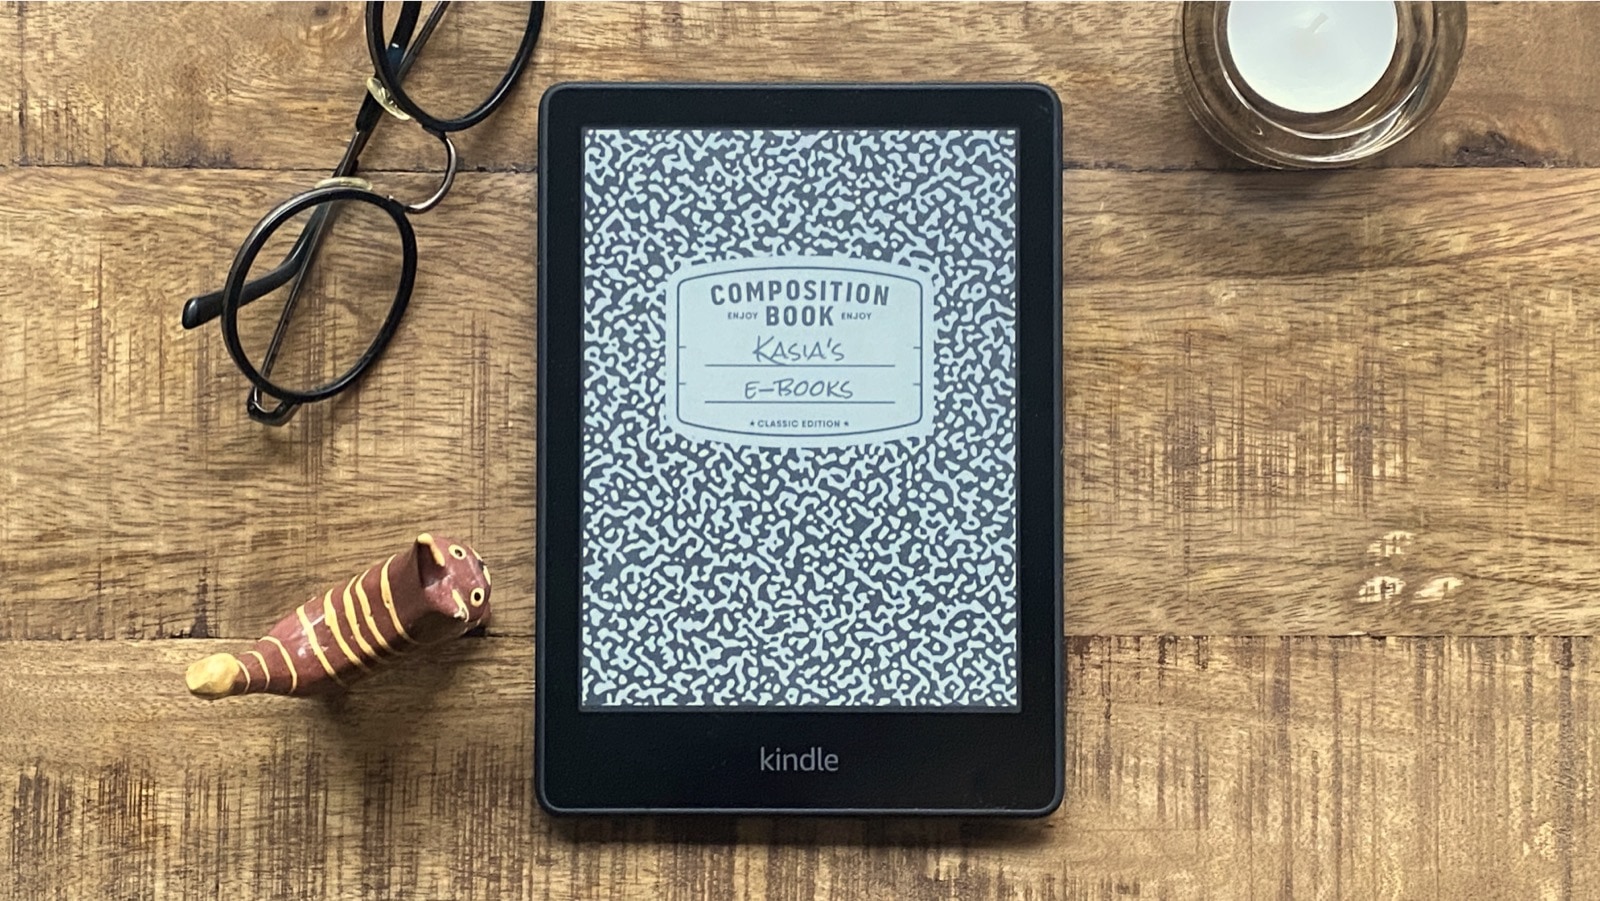 Turn your Kindle lockscreen into a custom composition notebook cover